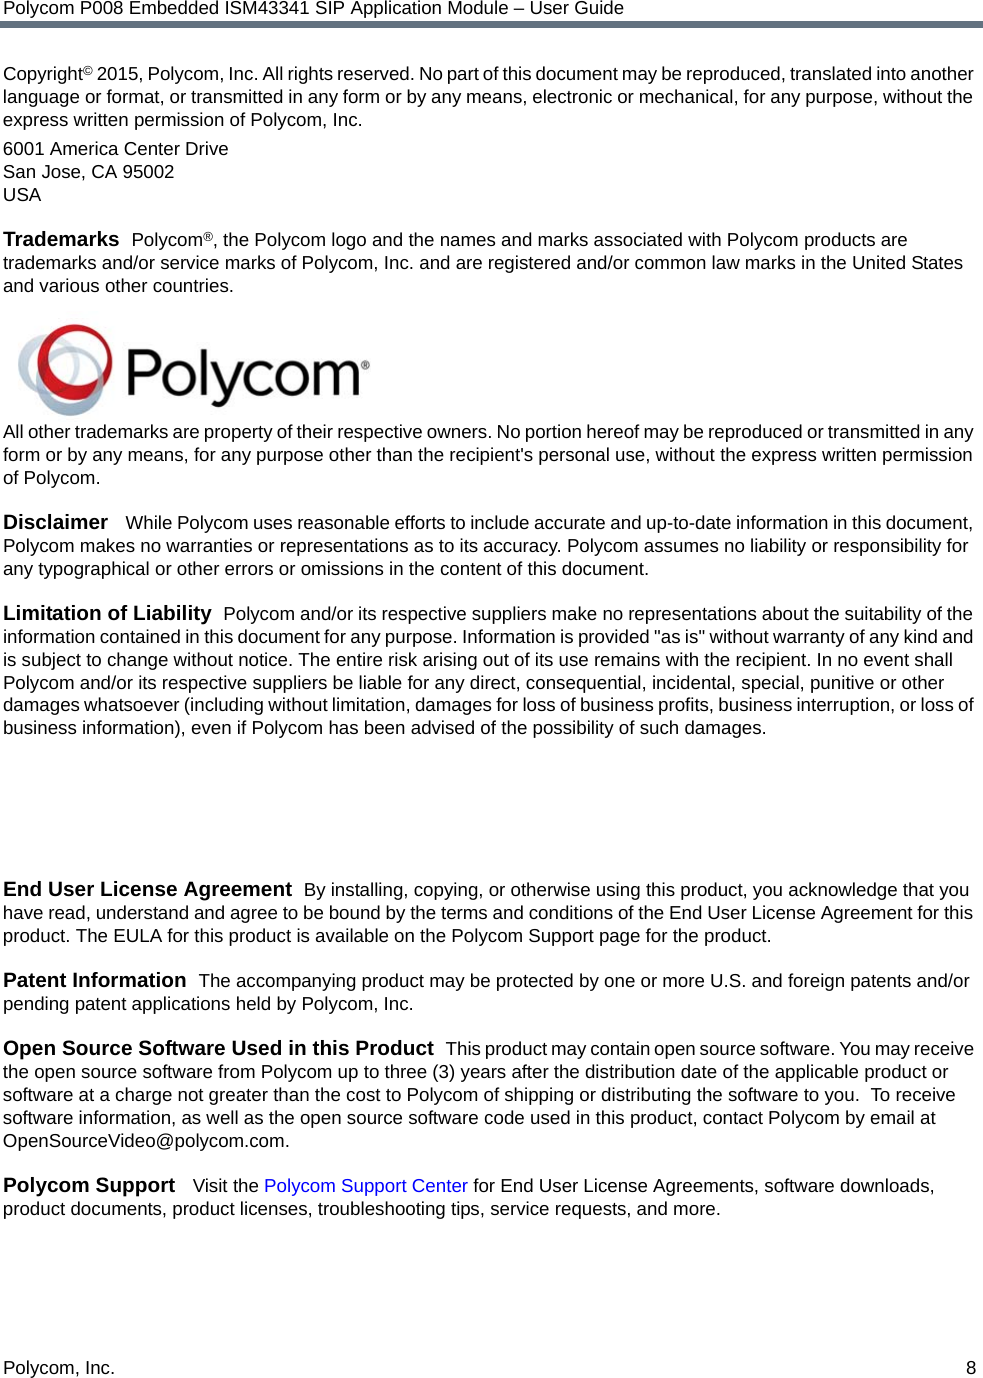 Polycom, Inc.  8Polycom P008 Embedded ISM43341 SIP Application Module – User GuideCopyright© 2015, Polycom, Inc. All rights reserved. No part of this document may be reproduced, translated into another language or format, or transmitted in any form or by any means, electronic or mechanical, for any purpose, without the express written permission of Polycom, Inc.6001 America Center DriveSan Jose, CA 95002USATrademarks  Polycom®, the Polycom logo and the names and marks associated with Polycom products are trademarks and/or service marks of Polycom, Inc. and are registered and/or common law marks in the United States and various other countries. All other trademarks are property of their respective owners. No portion hereof may be reproduced or transmitted in any form or by any means, for any purpose other than the recipient&apos;s personal use, without the express written permission of Polycom.Disclaimer   While Polycom uses reasonable efforts to include accurate and up-to-date information in this document, Polycom makes no warranties or representations as to its accuracy. Polycom assumes no liability or responsibility for any typographical or other errors or omissions in the content of this document.Limitation of Liability  Polycom and/or its respective suppliers make no representations about the suitability of the information contained in this document for any purpose. Information is provided &quot;as is&quot; without warranty of any kind and is subject to change without notice. The entire risk arising out of its use remains with the recipient. In no event shall Polycom and/or its respective suppliers be liable for any direct, consequential, incidental, special, punitive or other damages whatsoever (including without limitation, damages for loss of business profits, business interruption, or loss of business information), even if Polycom has been advised of the possibility of such damages.End User License Agreement  By installing, copying, or otherwise using this product, you acknowledge that you have read, understand and agree to be bound by the terms and conditions of the End User License Agreement for this product. The EULA for this product is available on the Polycom Support page for the product.Patent Information  The accompanying product may be protected by one or more U.S. and foreign patents and/or pending patent applications held by Polycom, Inc.Open Source Software Used in this Product  This product may contain open source software. You may receive the open source software from Polycom up to three (3) years after the distribution date of the applicable product or software at a charge not greater than the cost to Polycom of shipping or distributing the software to you.  To receive software information, as well as the open source software code used in this product, contact Polycom by email at OpenSourceVideo@polycom.com.Polycom Support   Visit the Polycom Support Center for End User License Agreements, software downloads, product documents, product licenses, troubleshooting tips, service requests, and more.